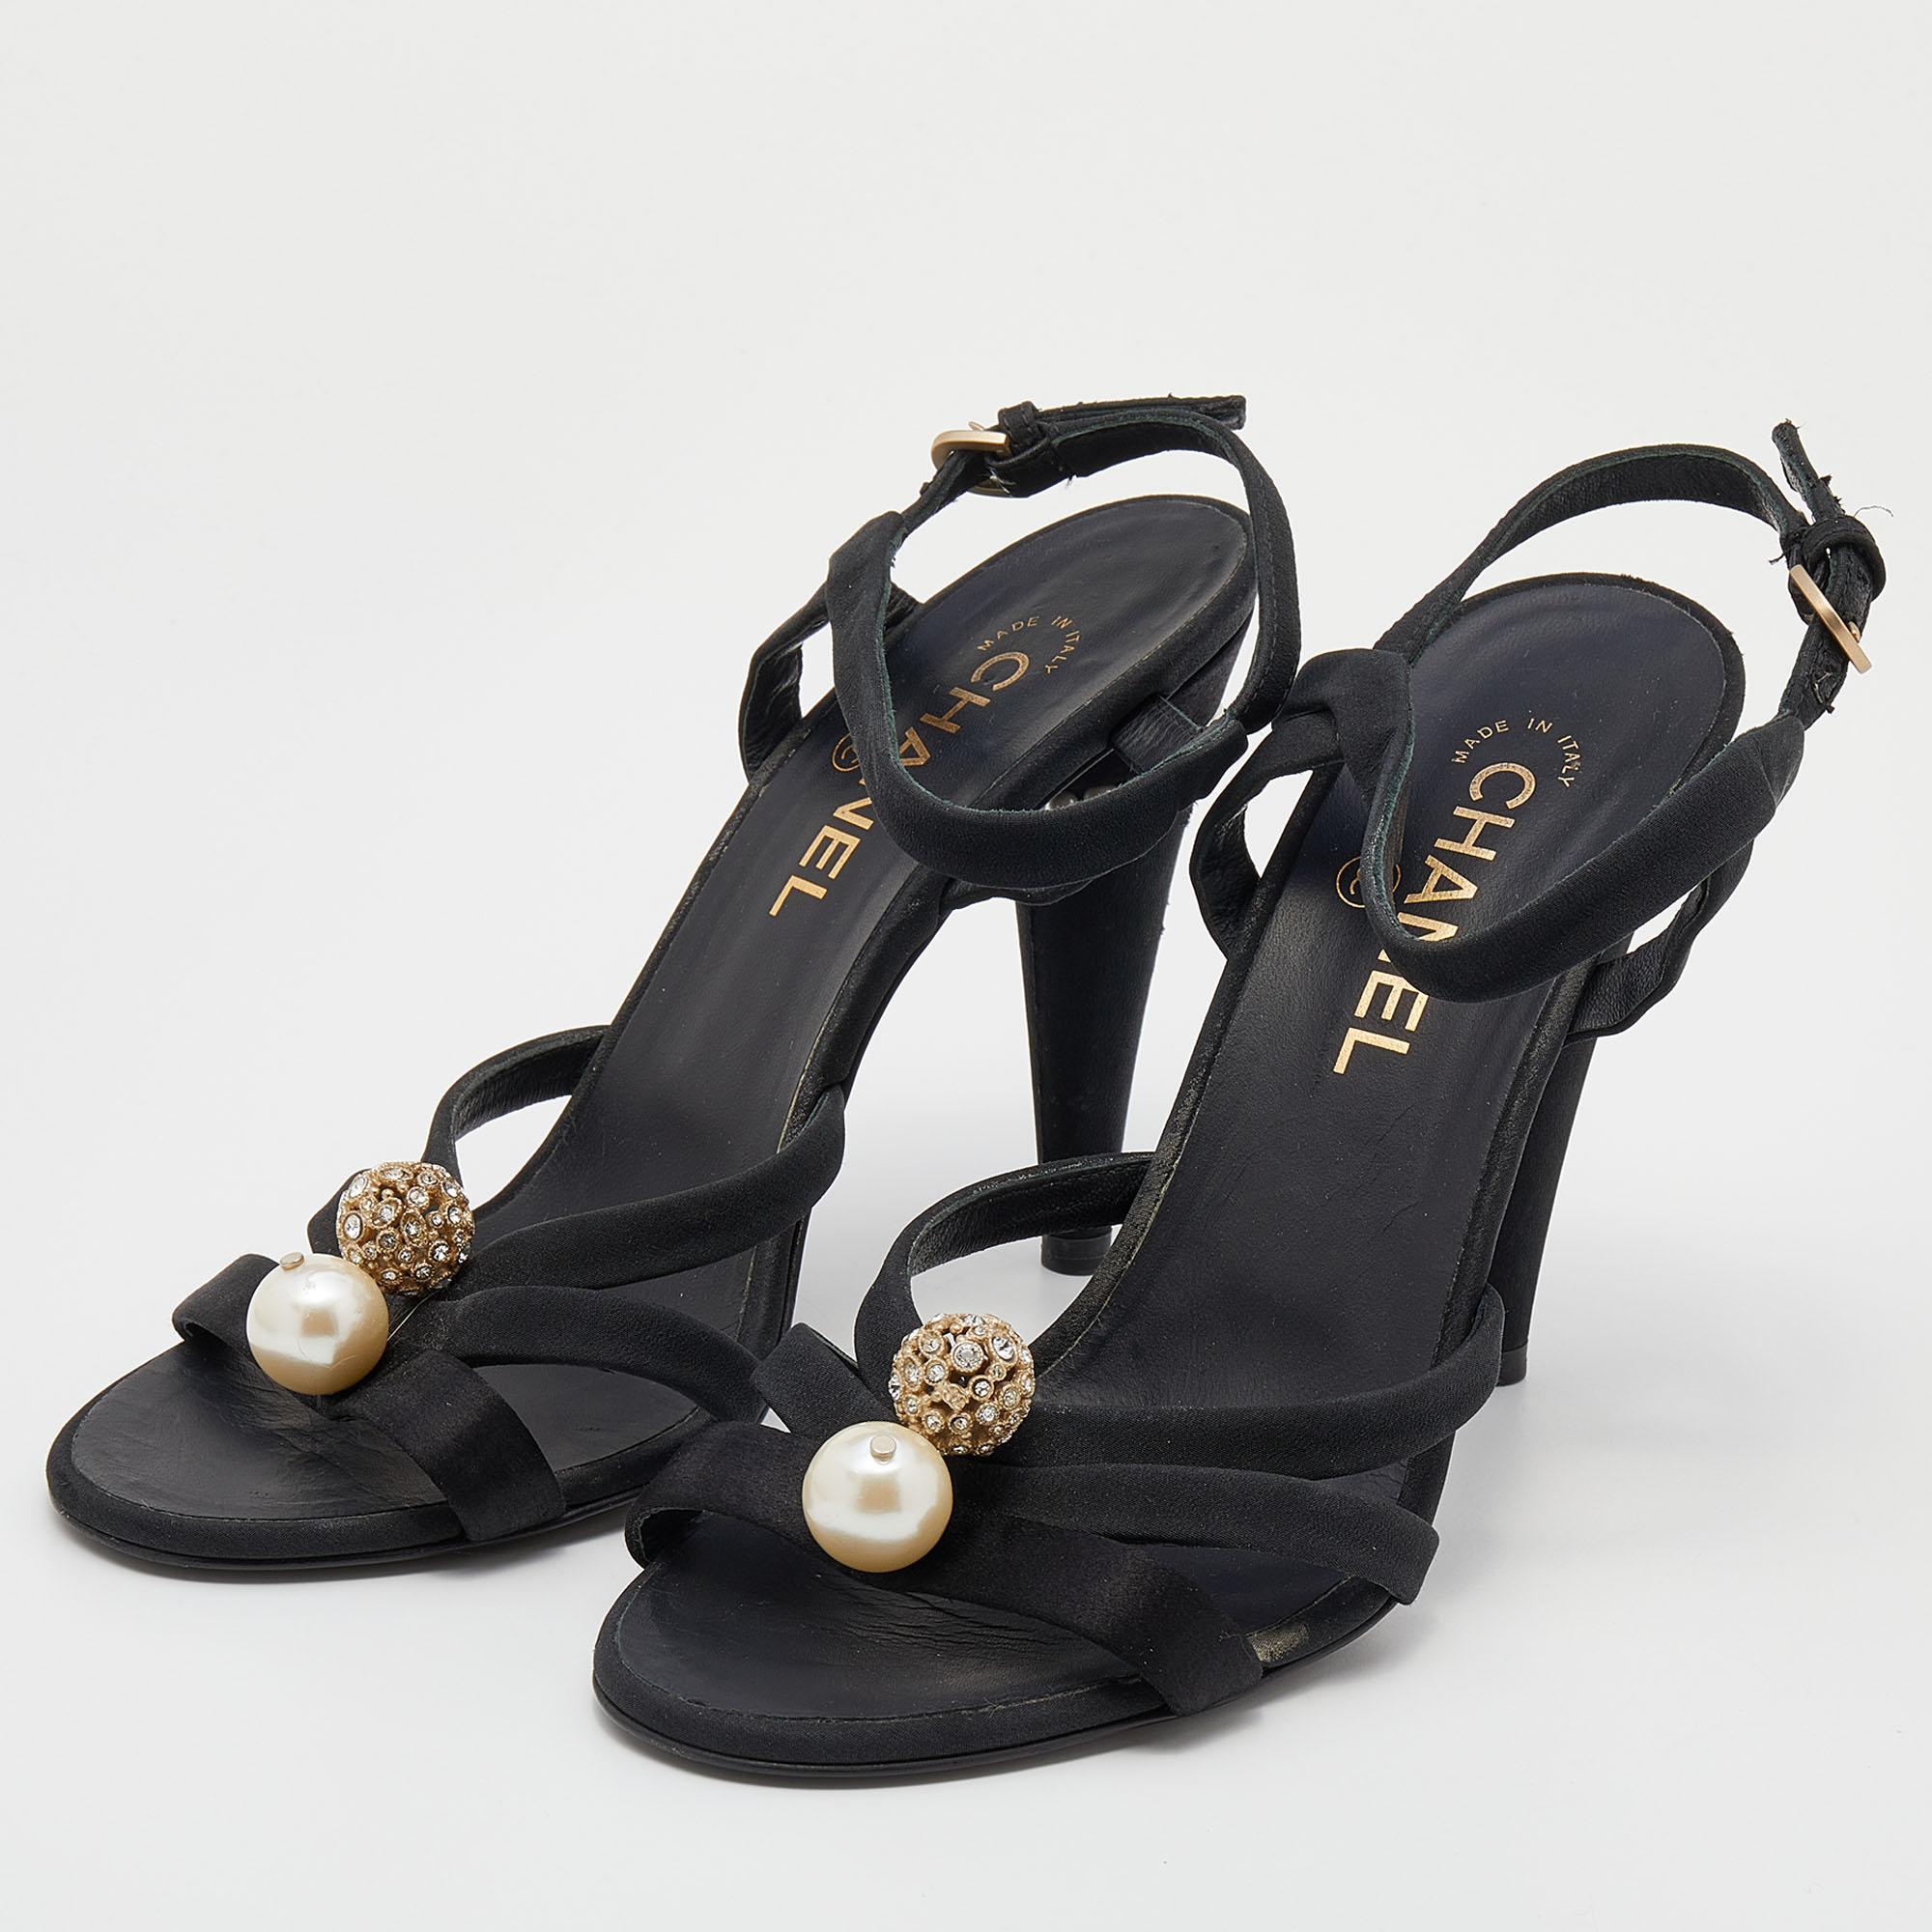 Adorned with a pearl and crystal embellishment, these Chanel sandals will add an instant dose of glam to your outfit. Their 11cm heels are designed with a 'CC' motif on them and these shoes are secured with an ankle buckle closure. Created from